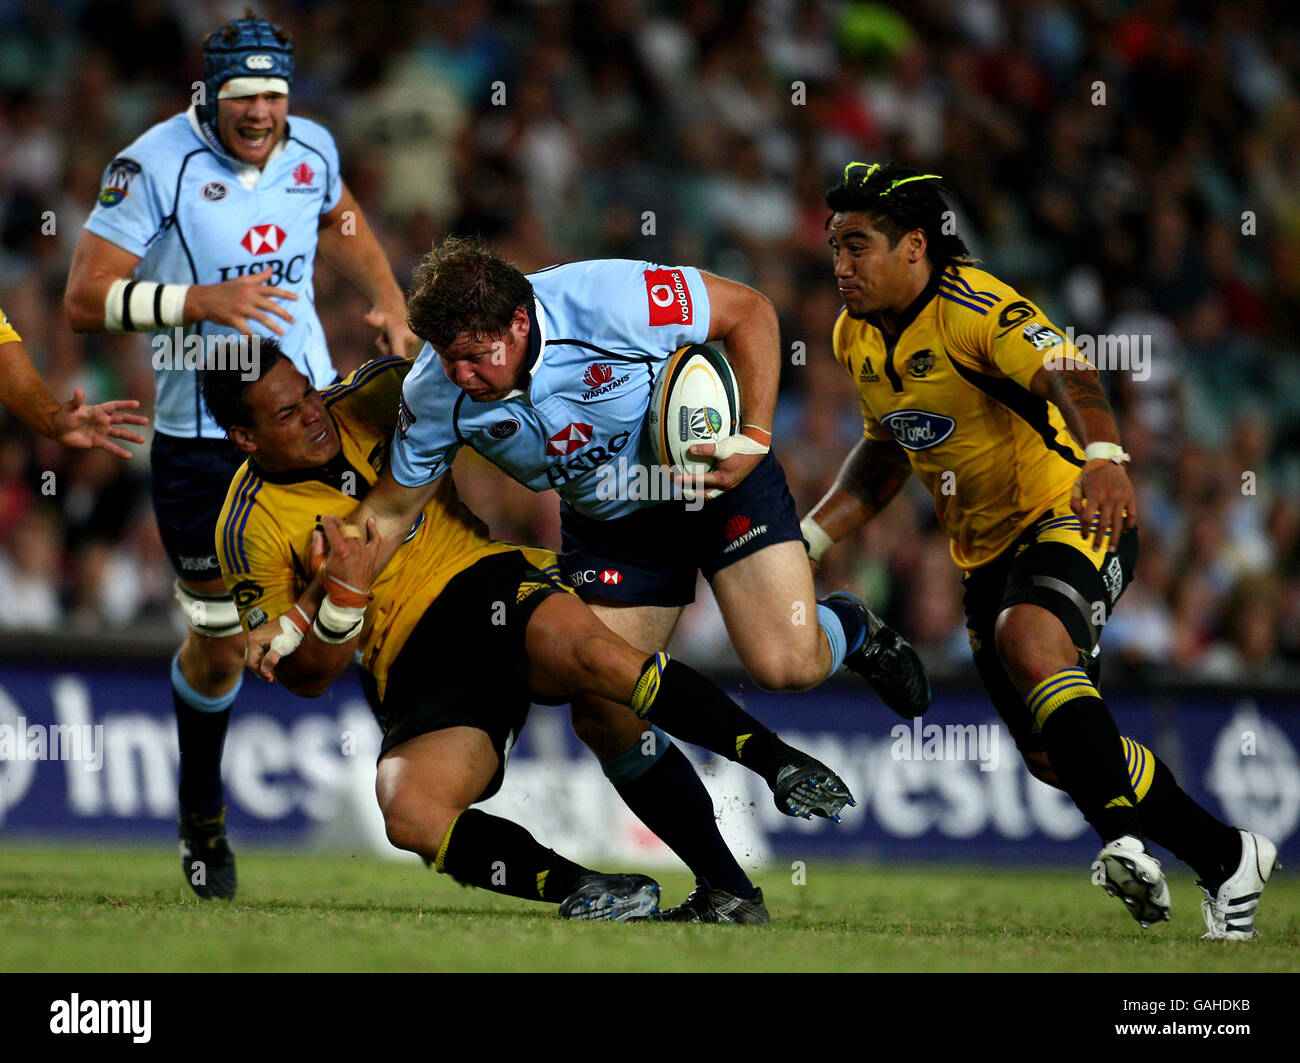 Waratahs Matt Dunning is tackled by Hurricanes Chris Masoe during opening match of the Super 14's season for the NSW Warartahs and New Zealand Hurricanes Stock Photo